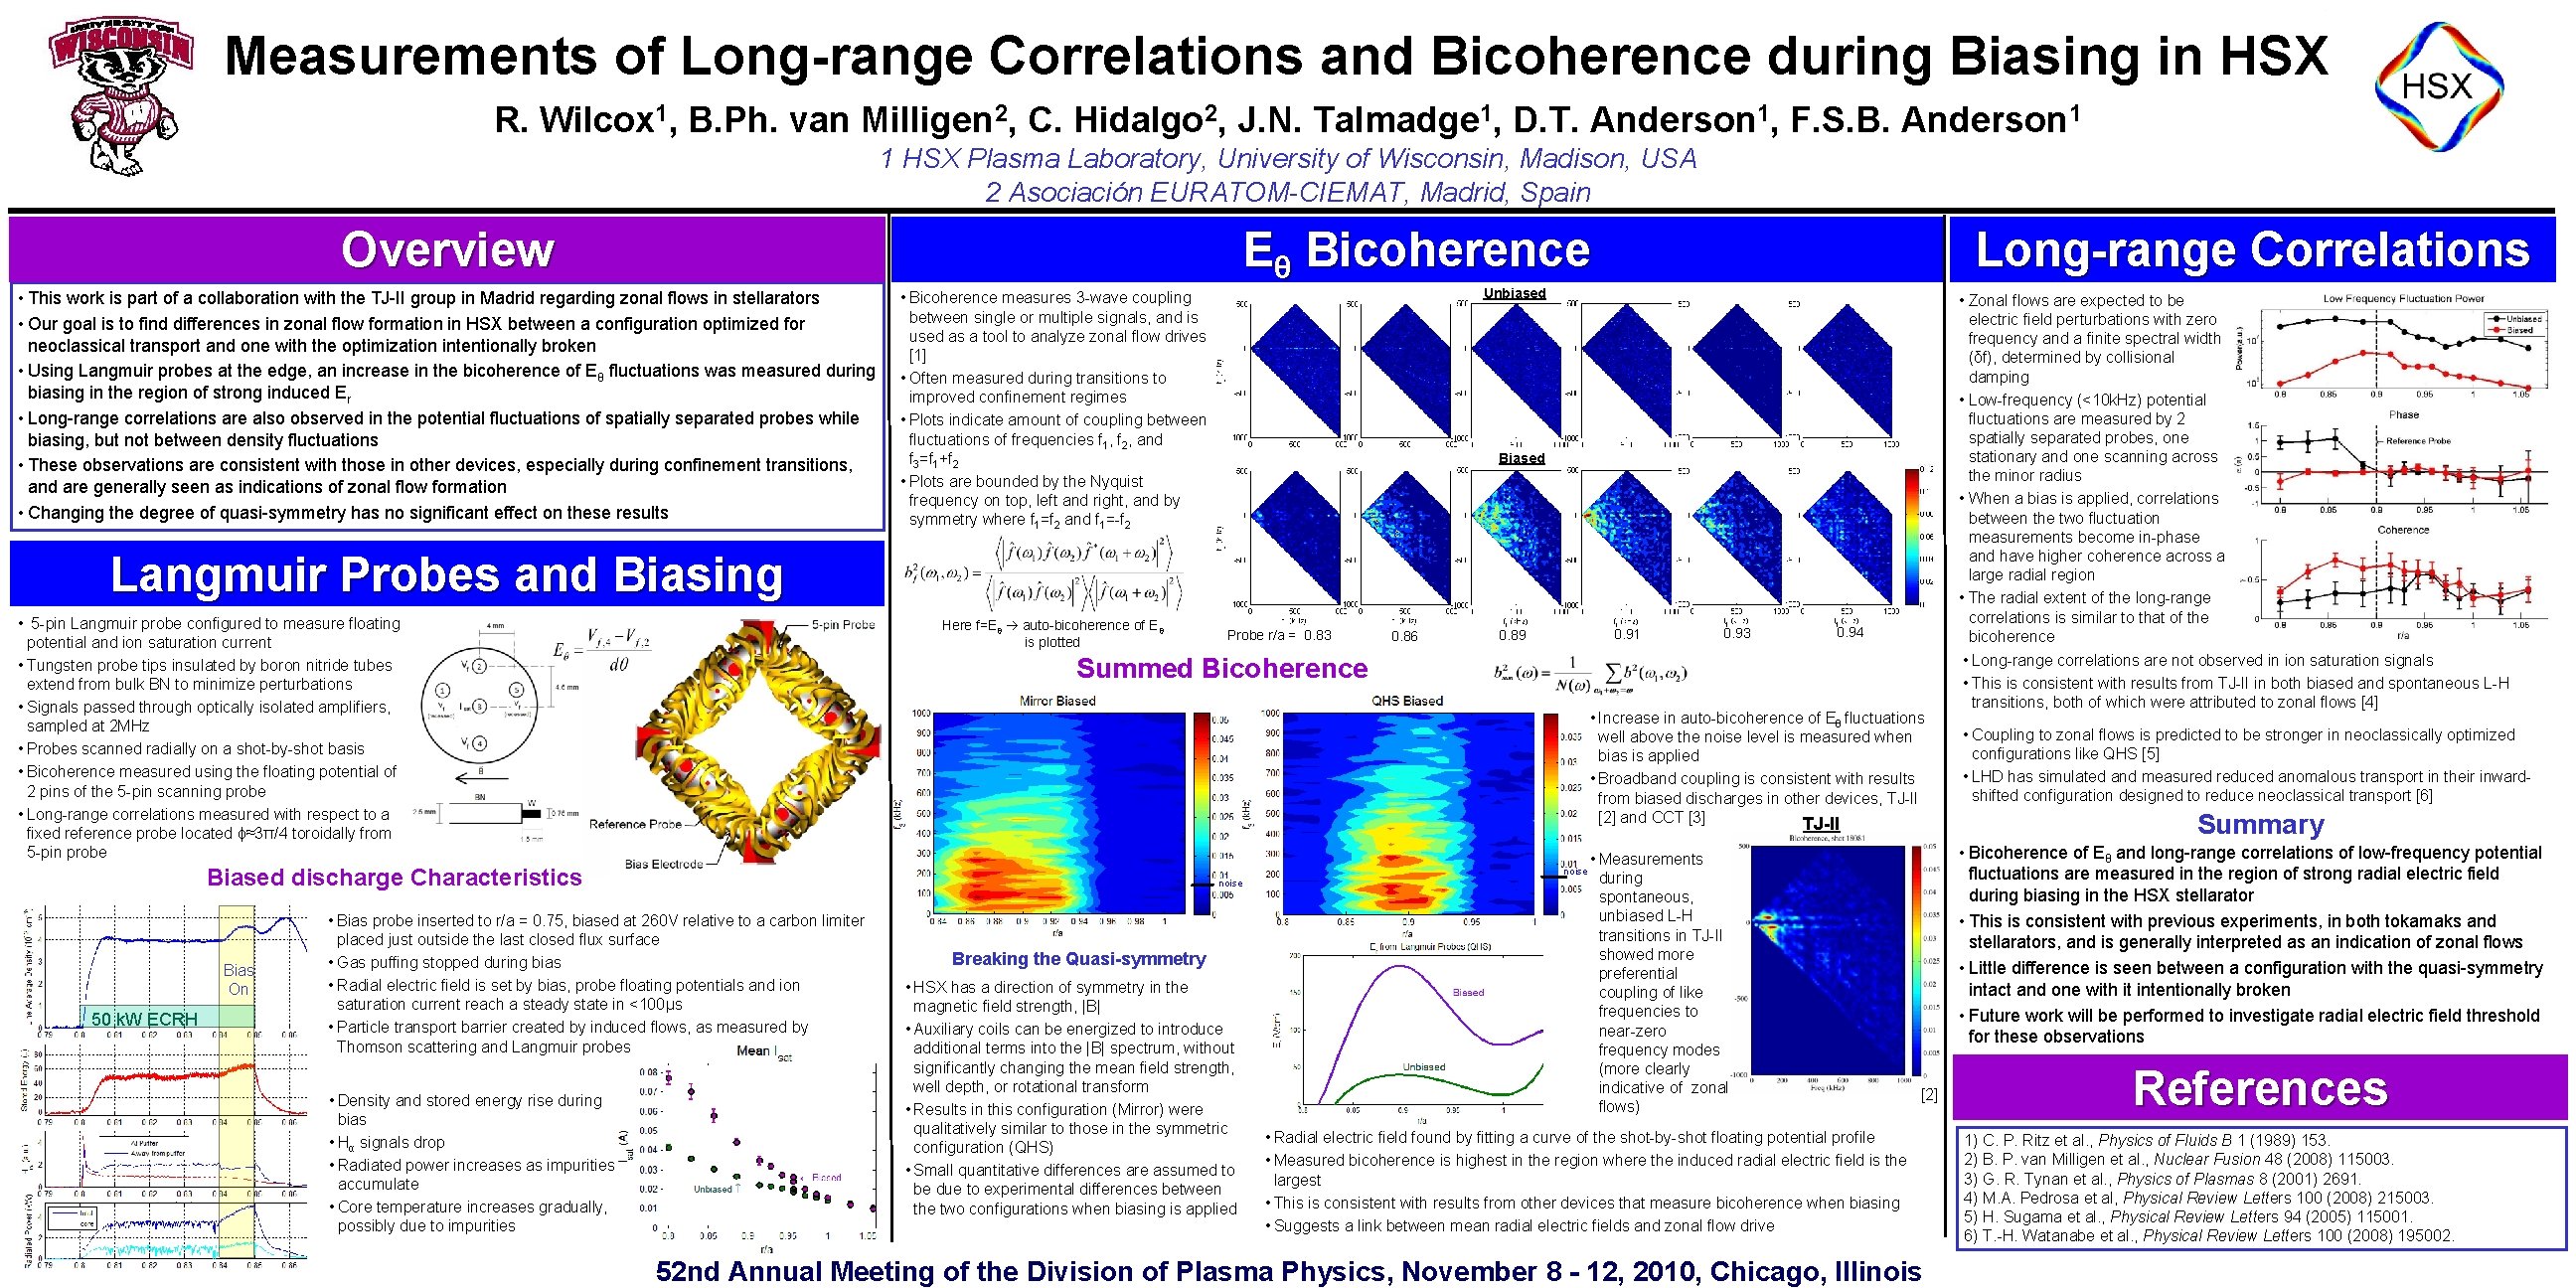 Measurements of Long-range Correlations and Bicoherence during Biasing in HSX R. Wilcox 1, B.